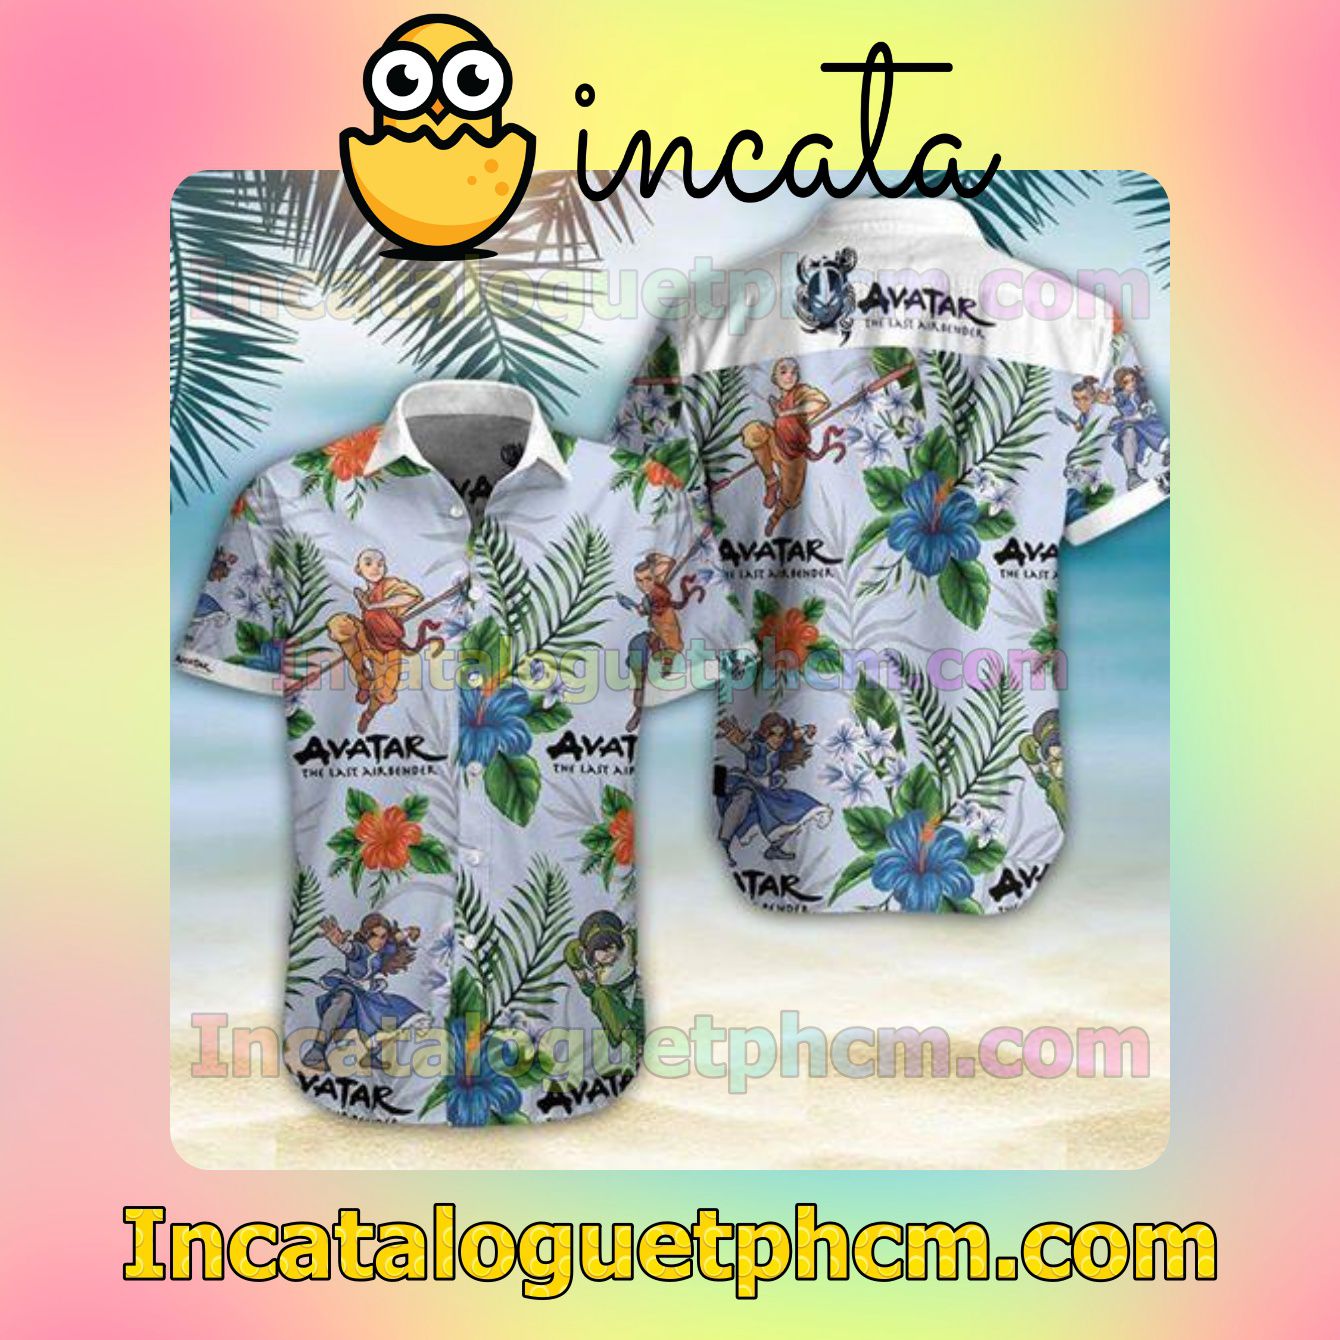 Avatar The Last Airbender Tropical Hibiscus Palm Leaf Men's Casual Shirts